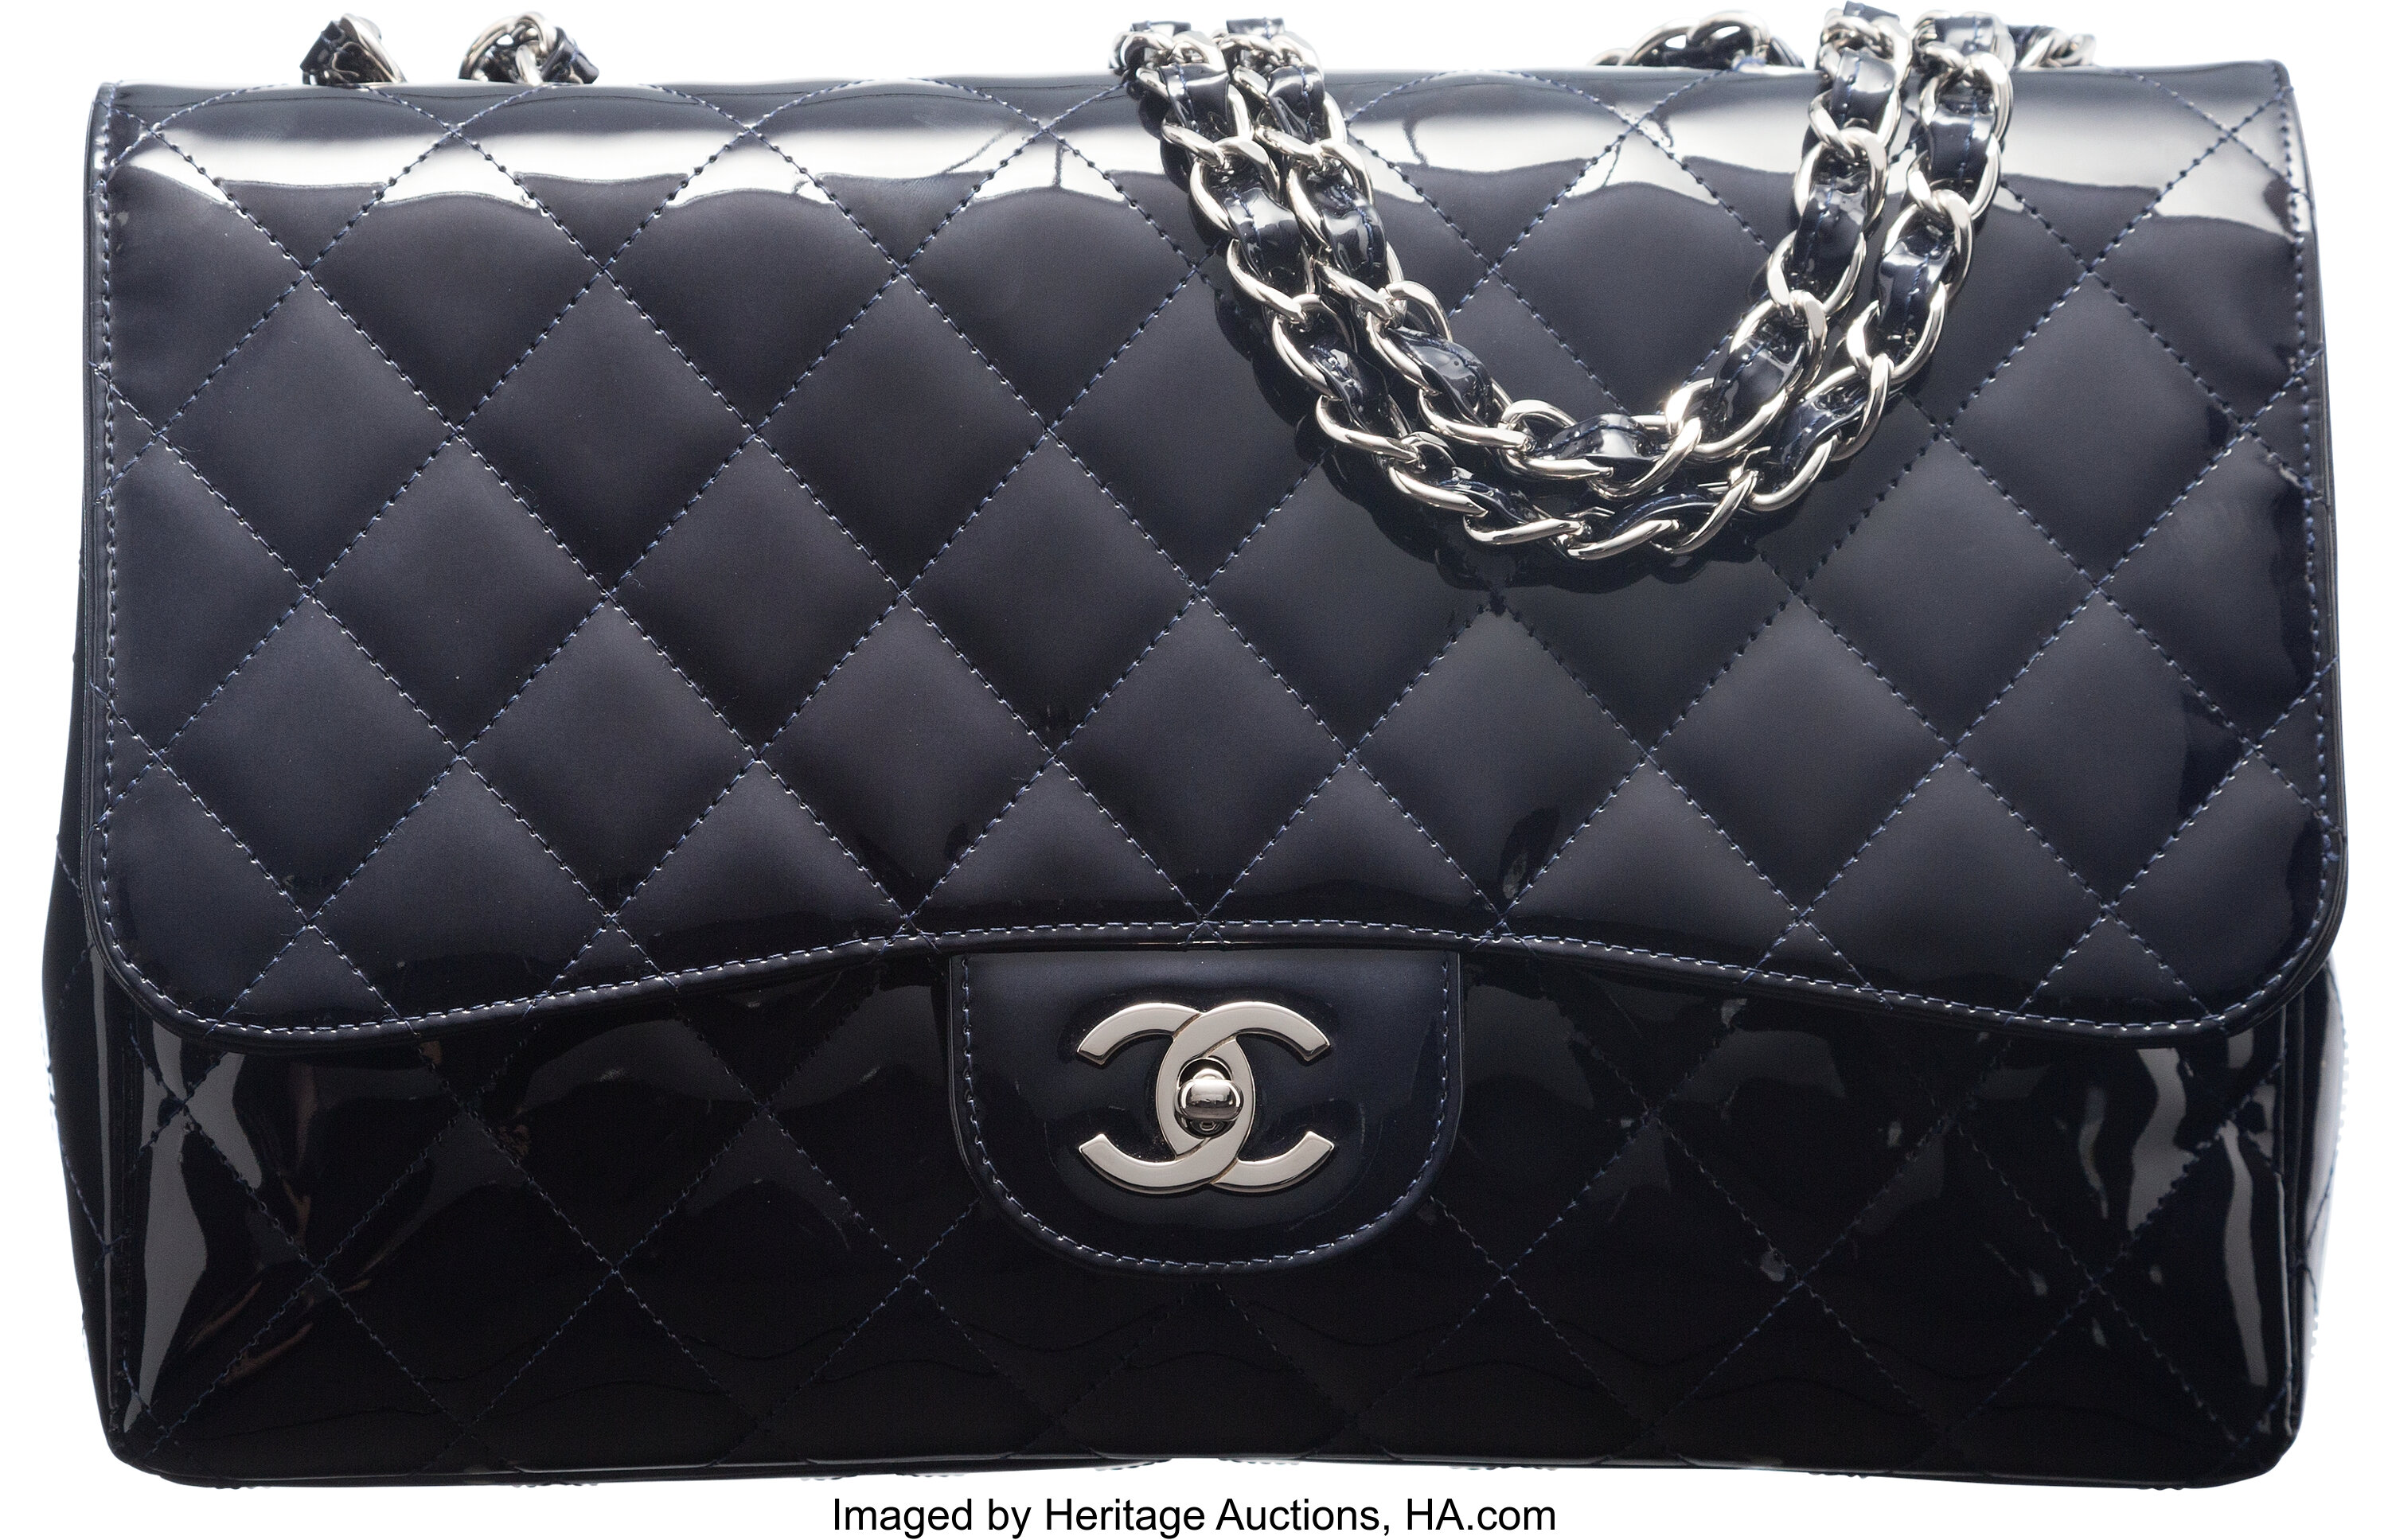 Chanel Limited Edition Karl Lagerfeld Sketches Flap Bag